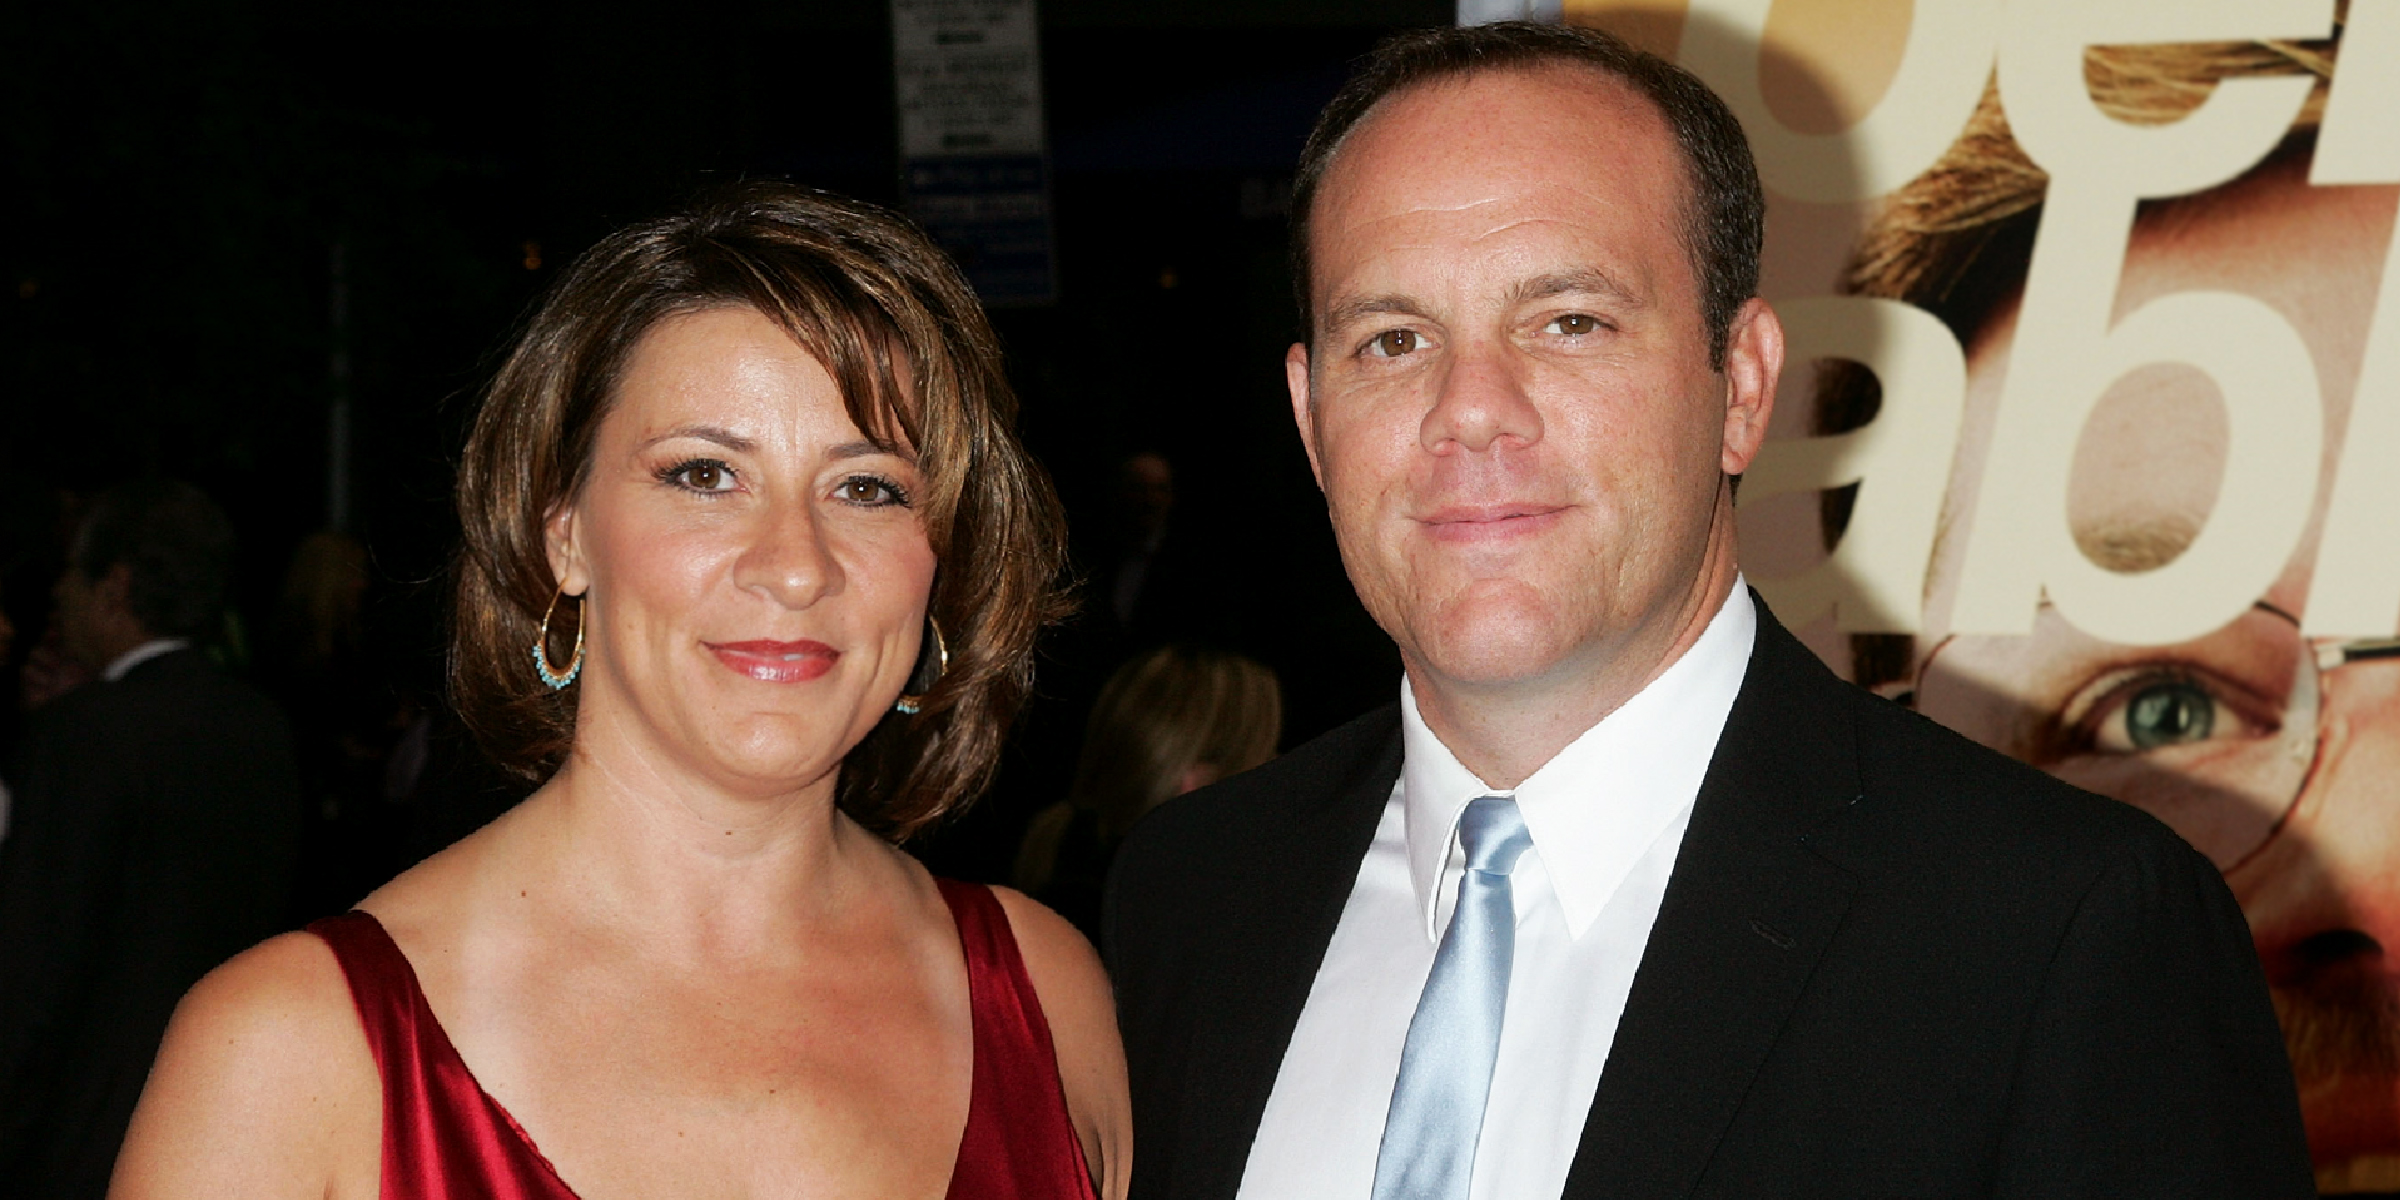 Tom Papa and Cynthia Koury. | Source: Getty Images